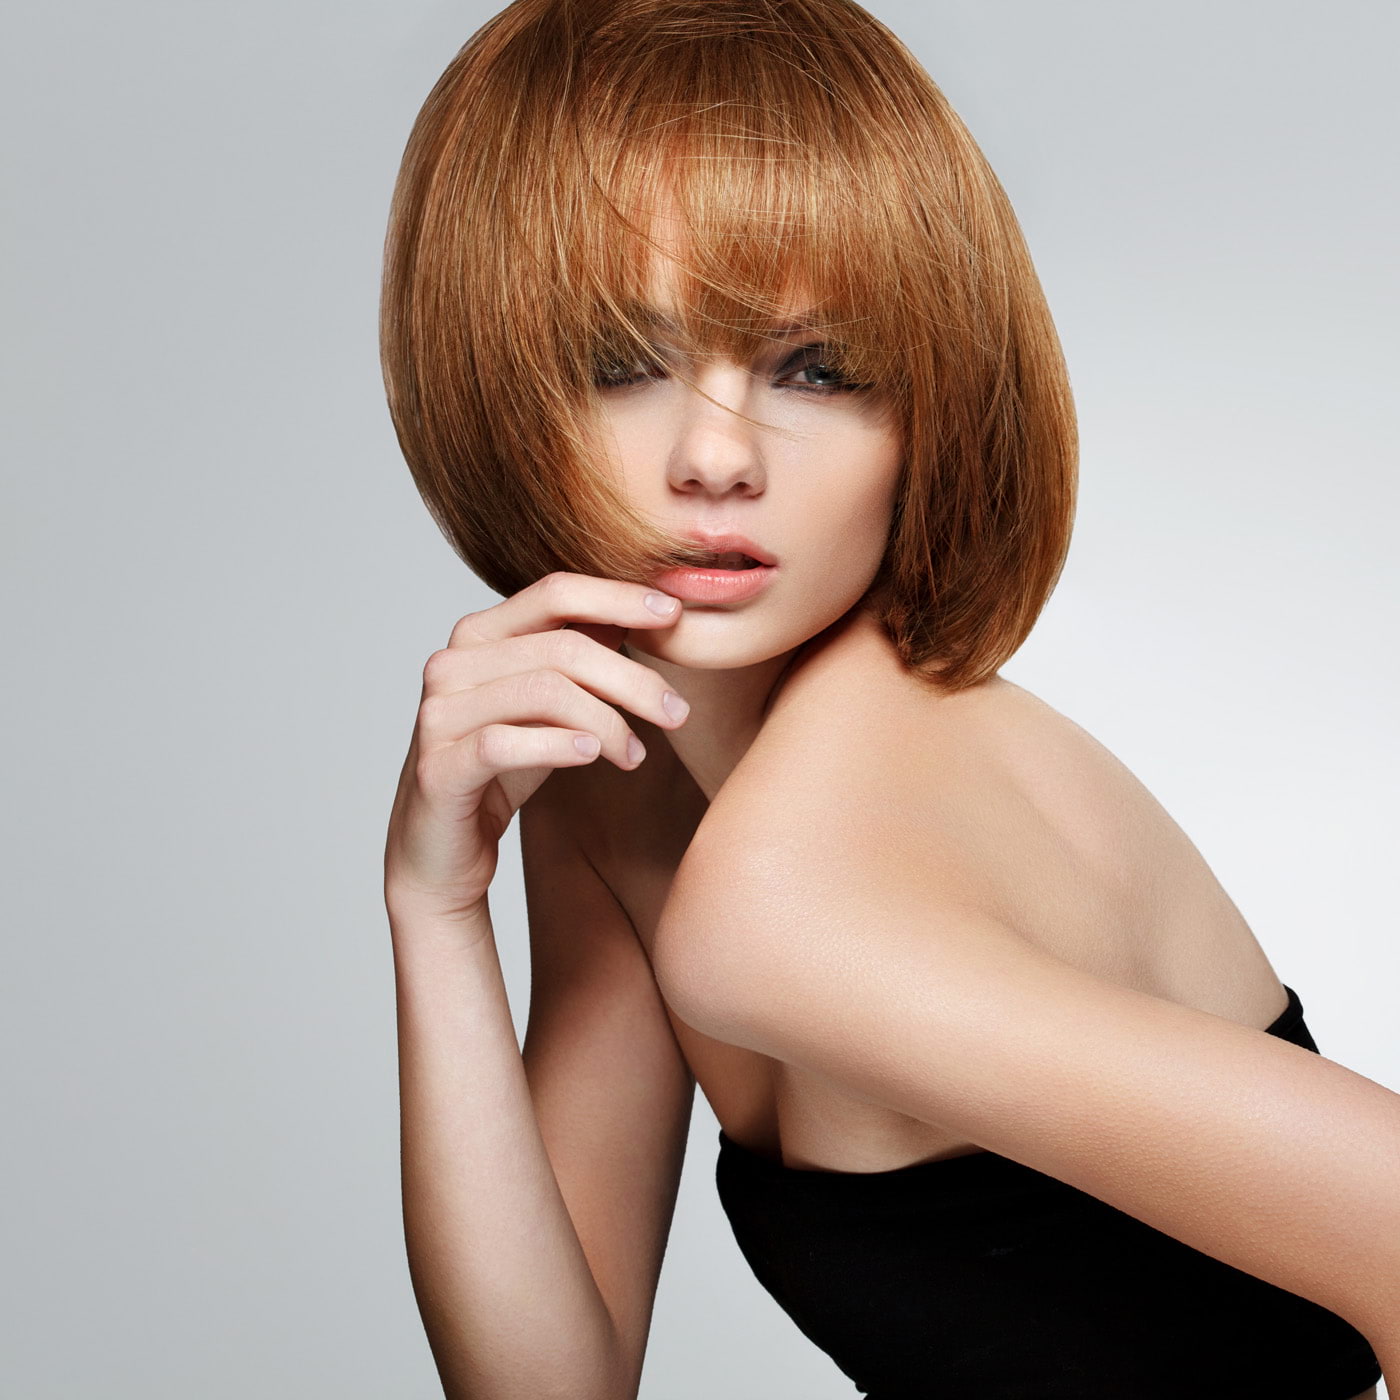 What are the most on-trend fringe styles right now? Find out more about wispy fringes, short fringes, curly looks, grown out styles & much more. Book an appointment with an expert stylist to choose the right look for you.